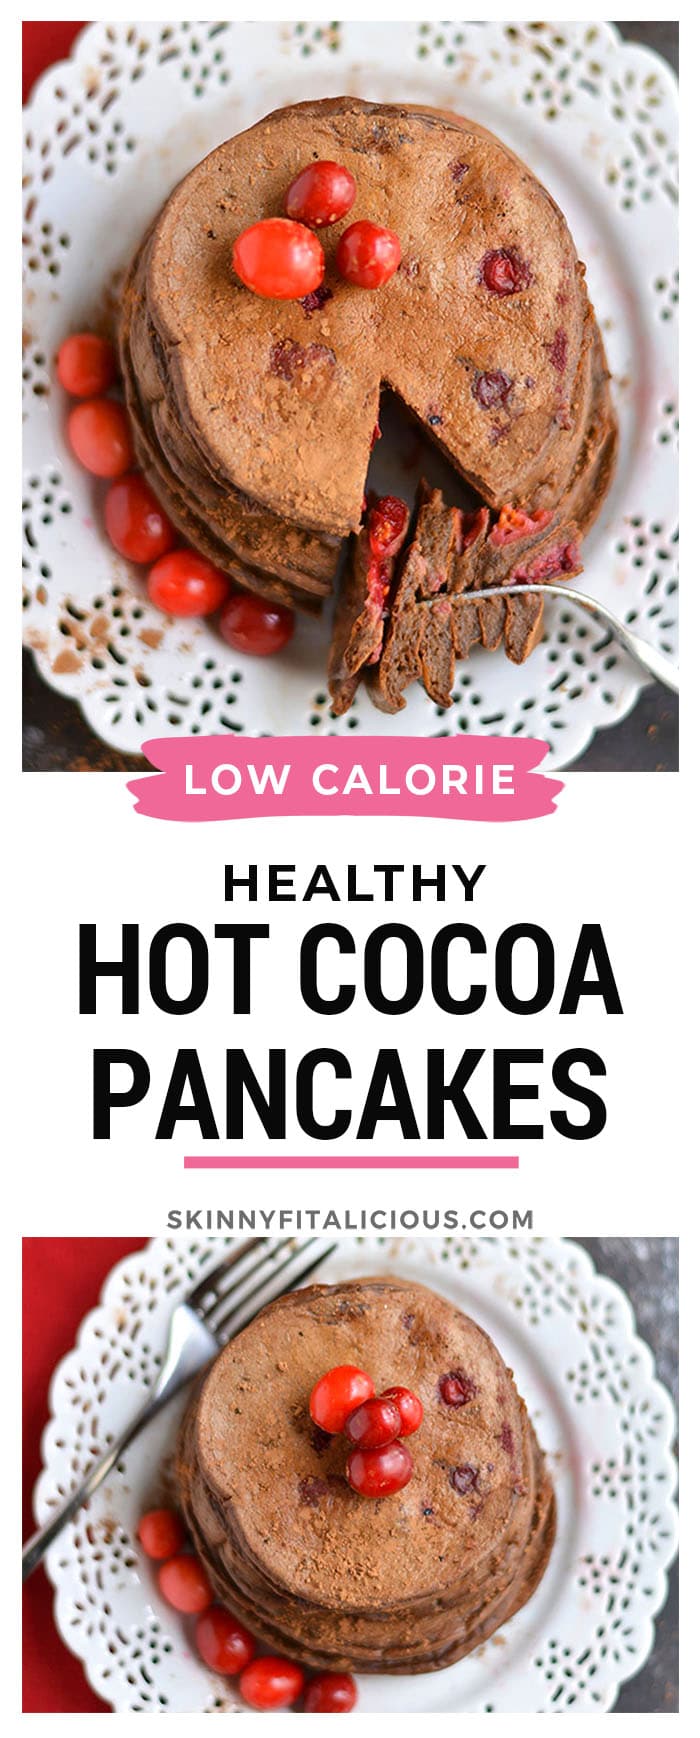 Cranberry Cocoa Pancakes! These pancakes taste like hot cocoa without the calories! High in antioxidants and packed with protein, these crepe-like pancakes are bursting with natural sweetness.